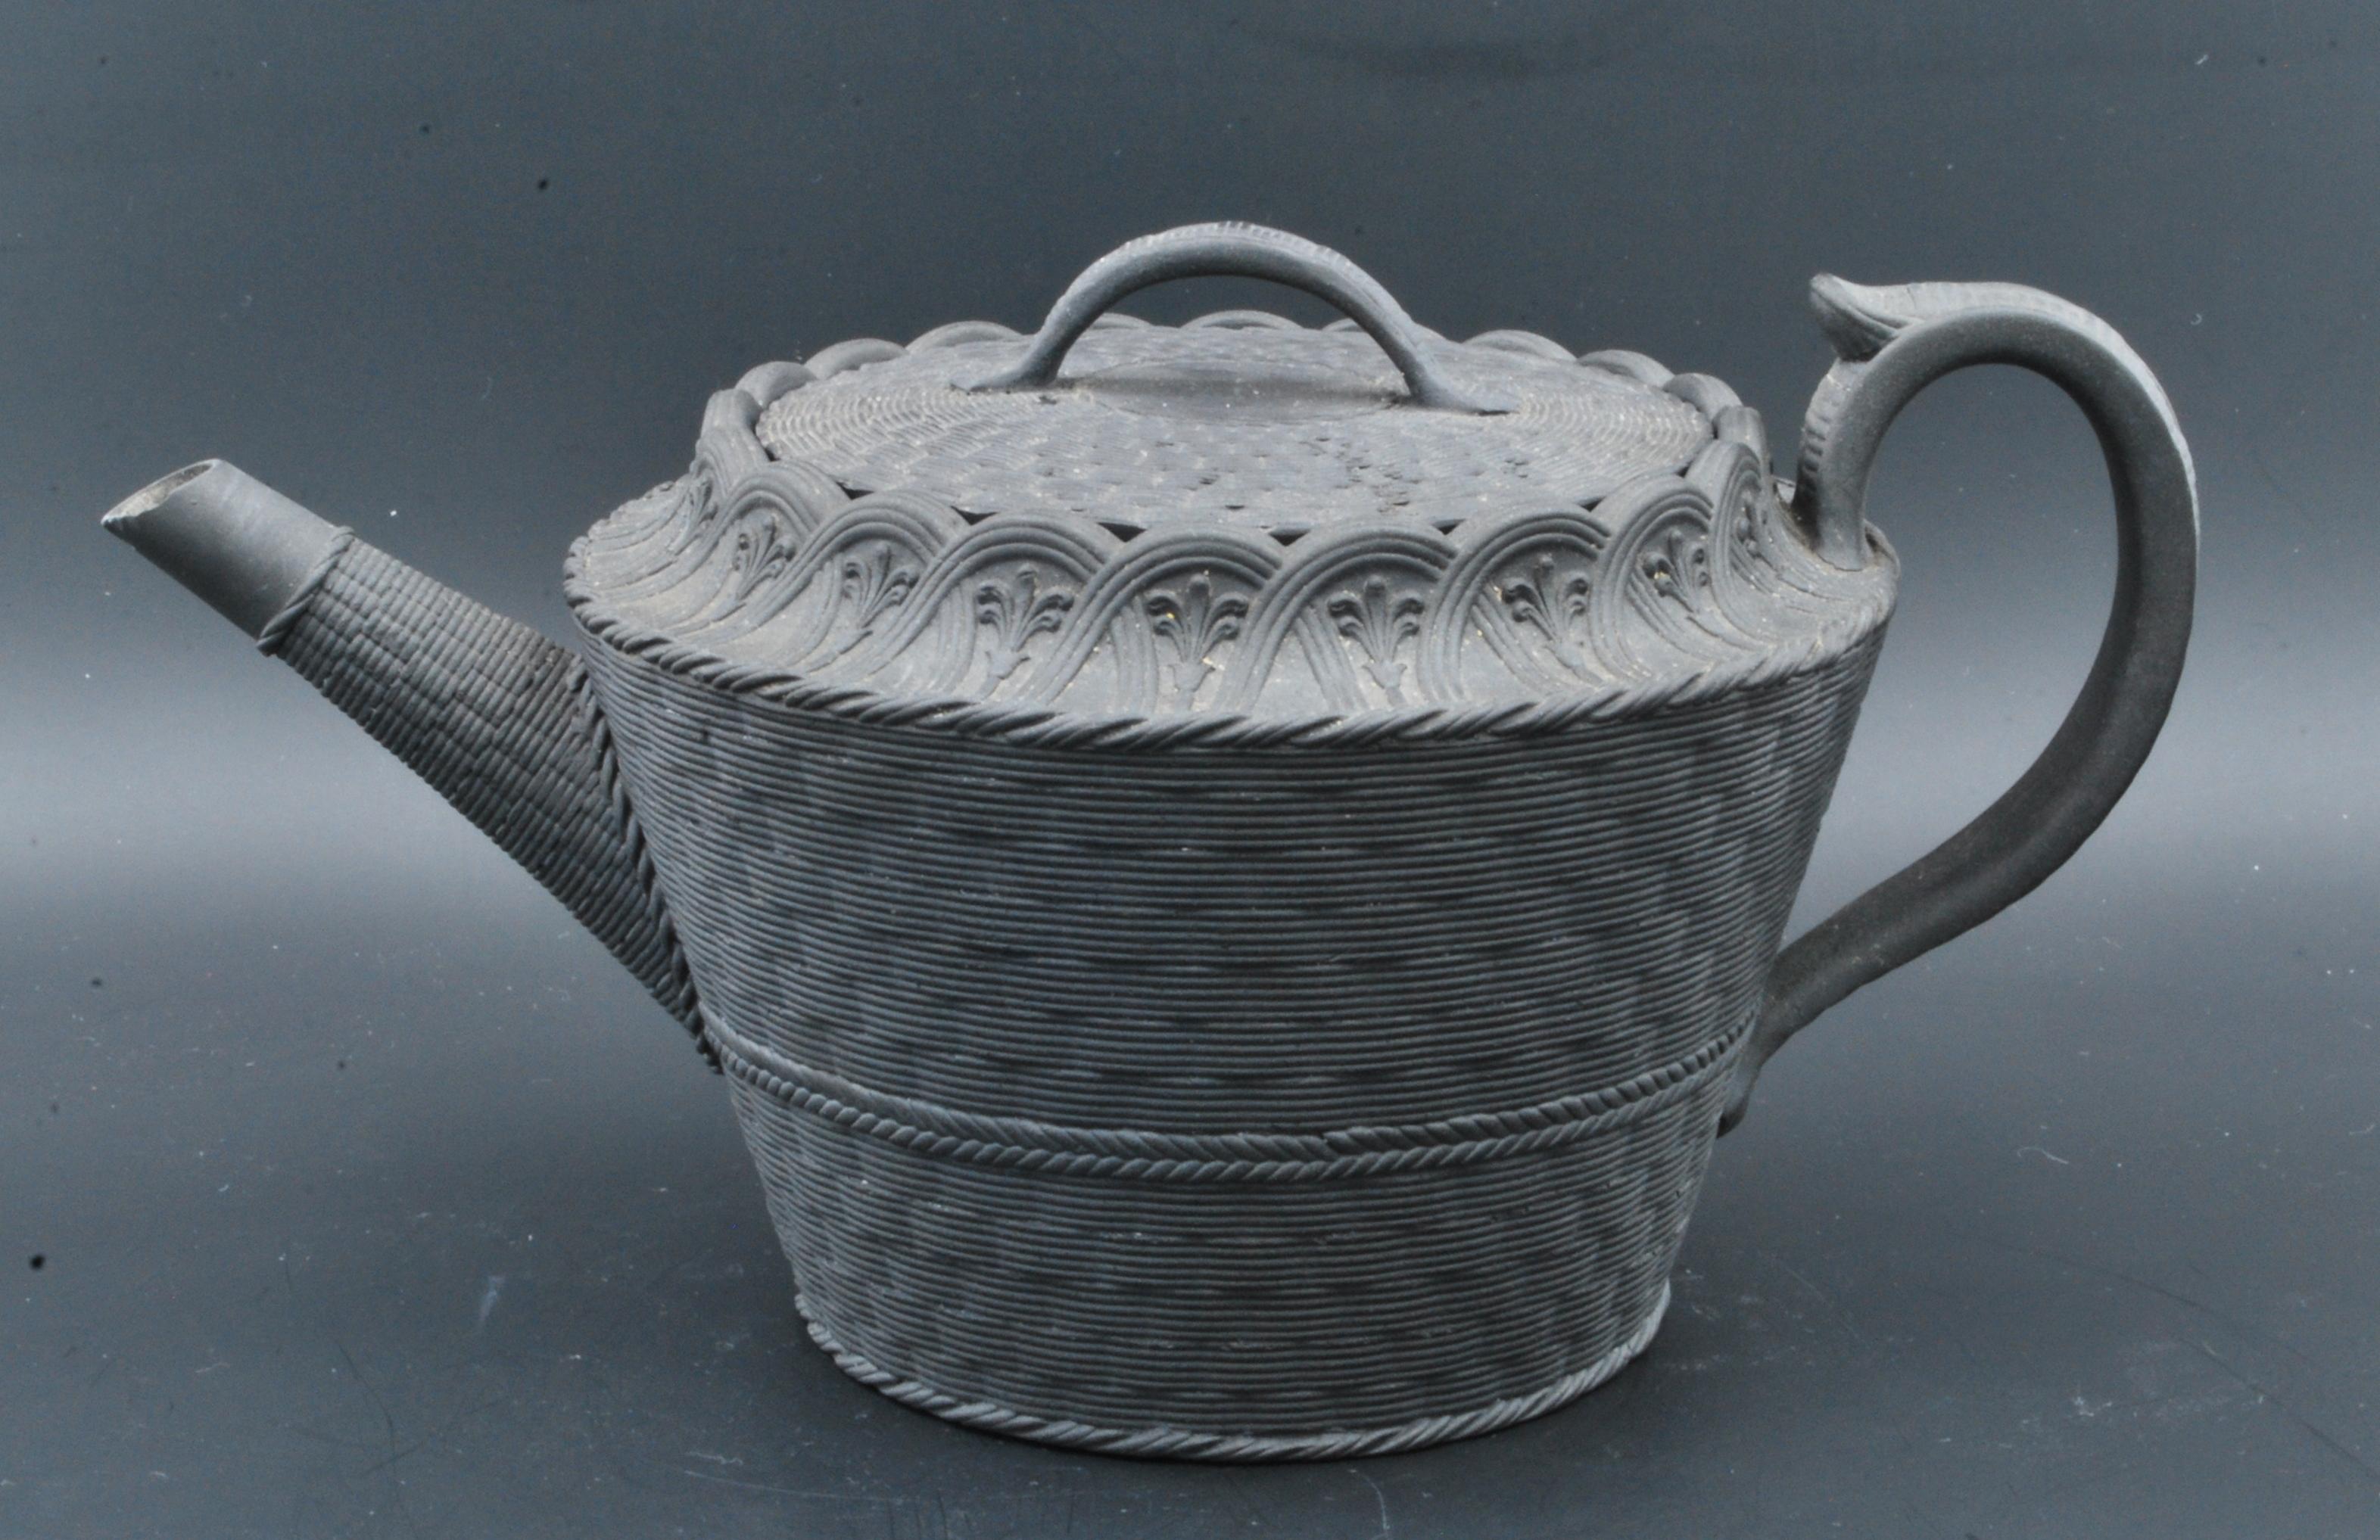 A most attractive and unusual teapot in black basalt, moulded with basket-weave decoration and interlocking arches.

Exhibited: Wedgwood, Master Potter to the Universe, Roche Foundation, 2023.